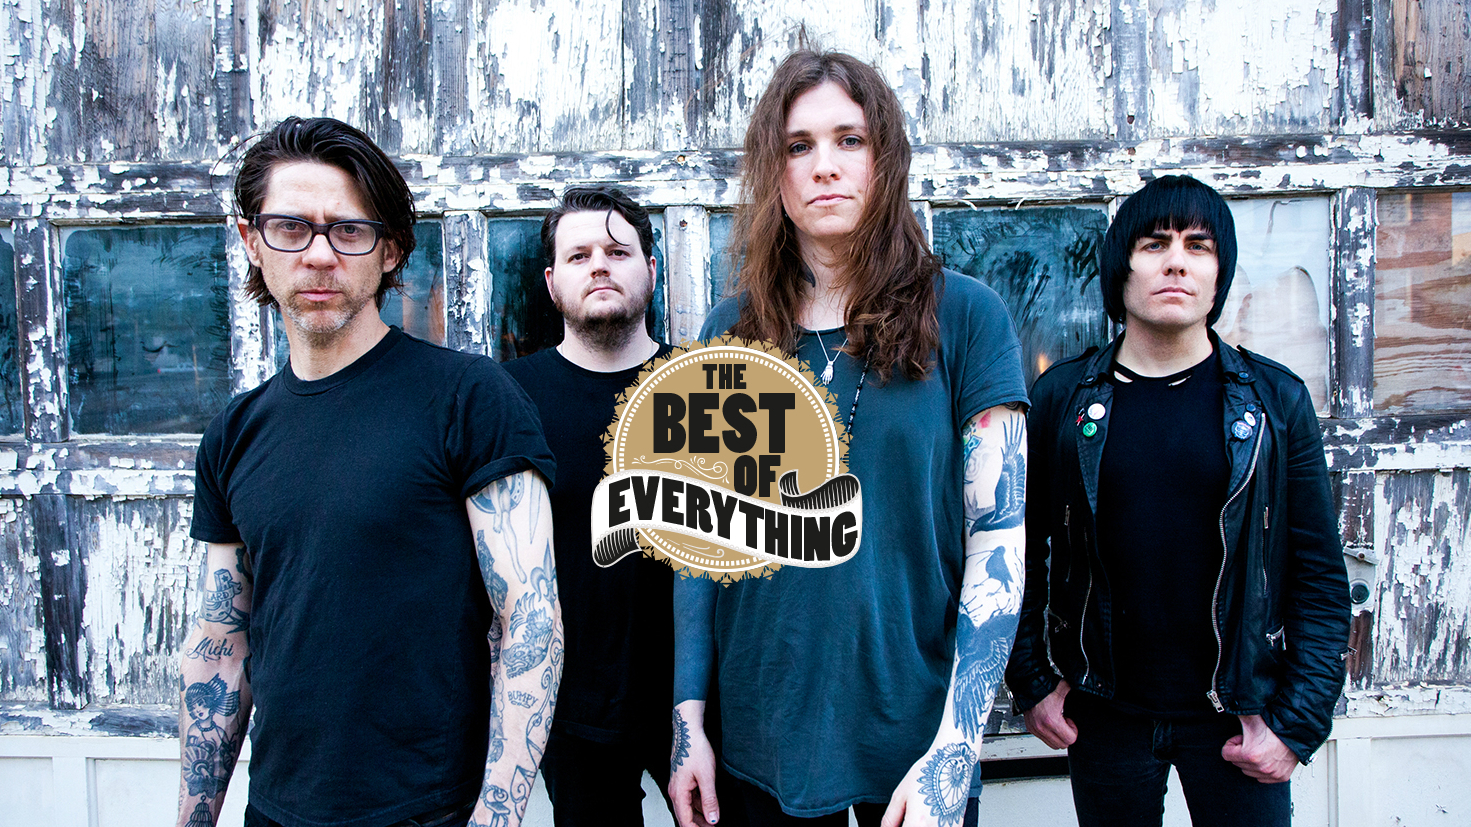 Against Me! - Albums, Songs, and News